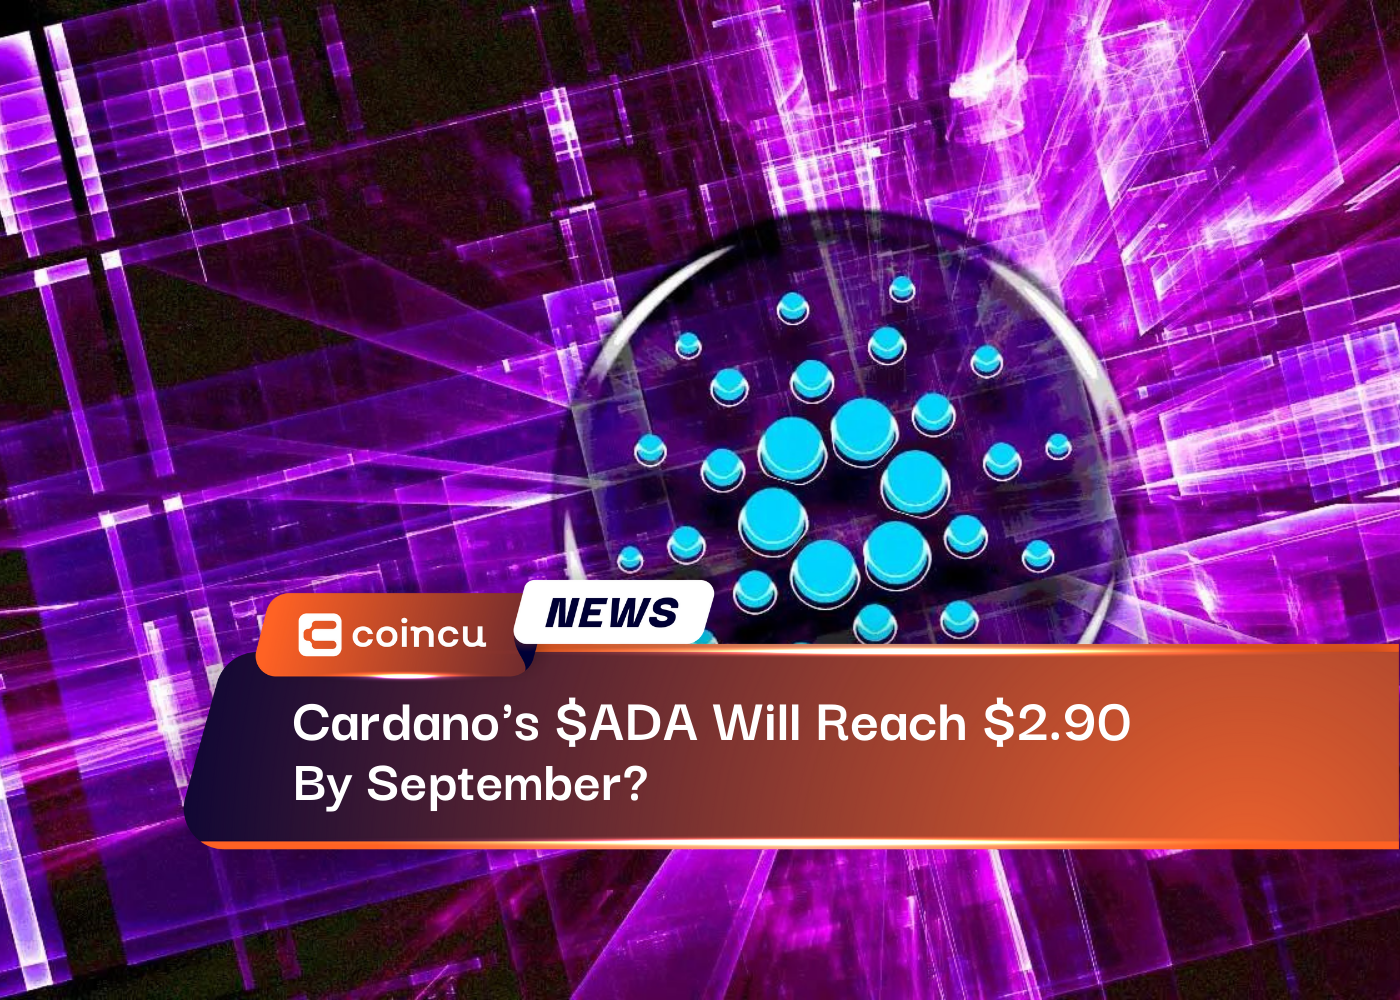 Cardano’s $ADA Will Reach $2.90 By September This Year?